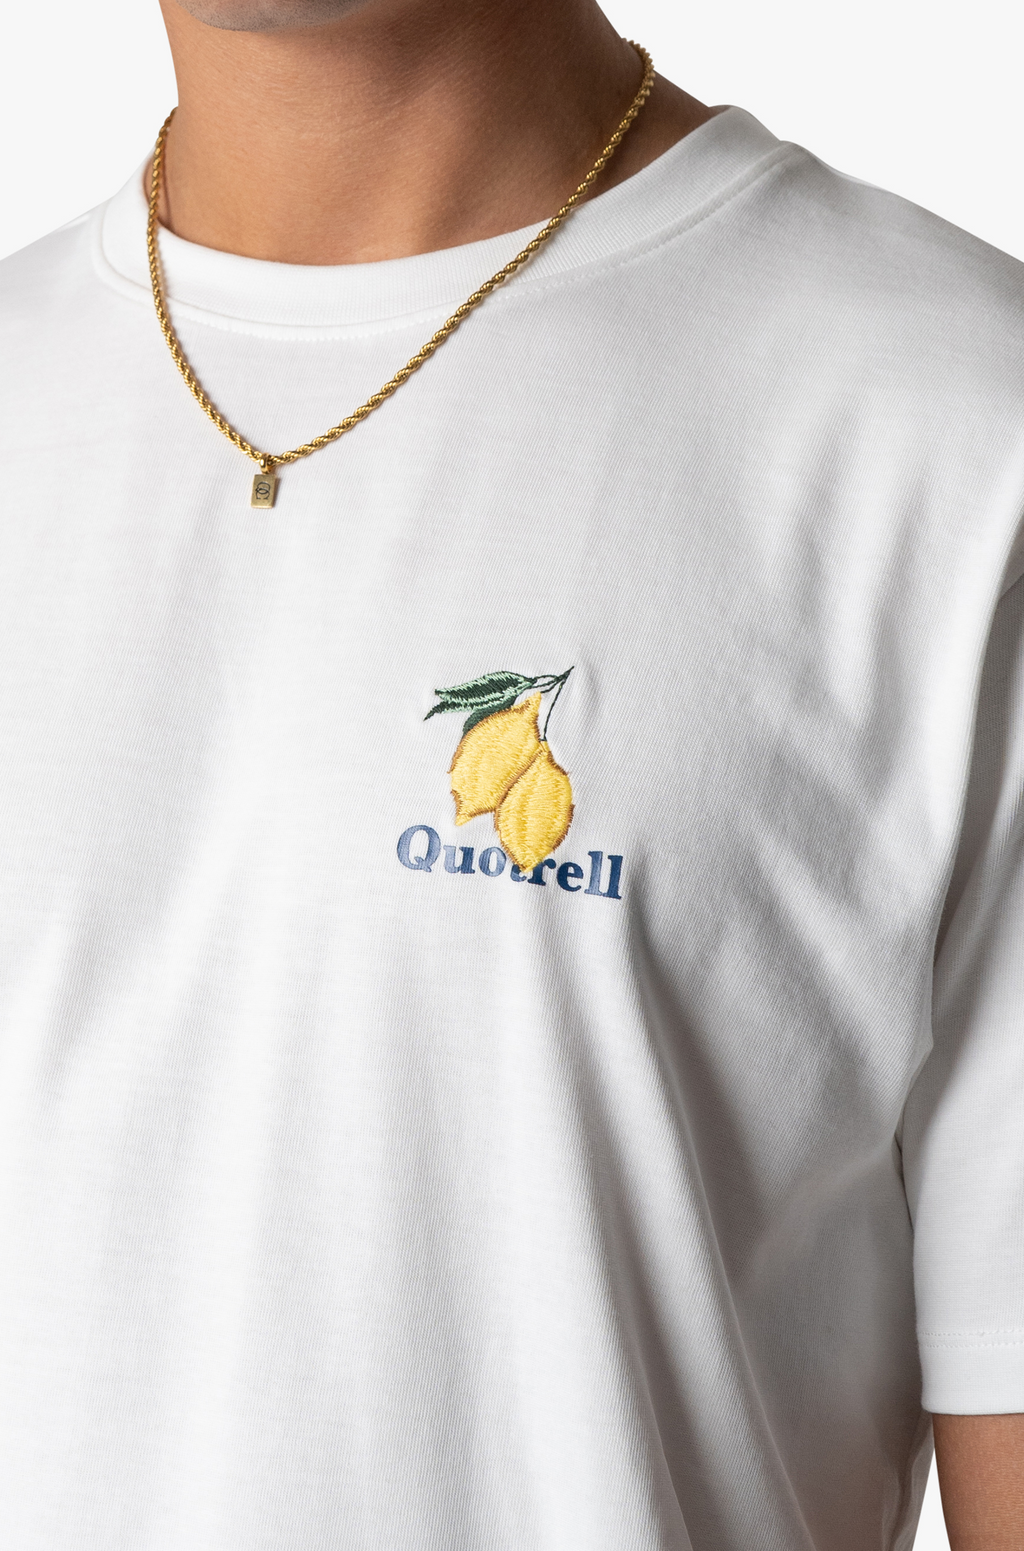 Quotrell Limone T-shirt